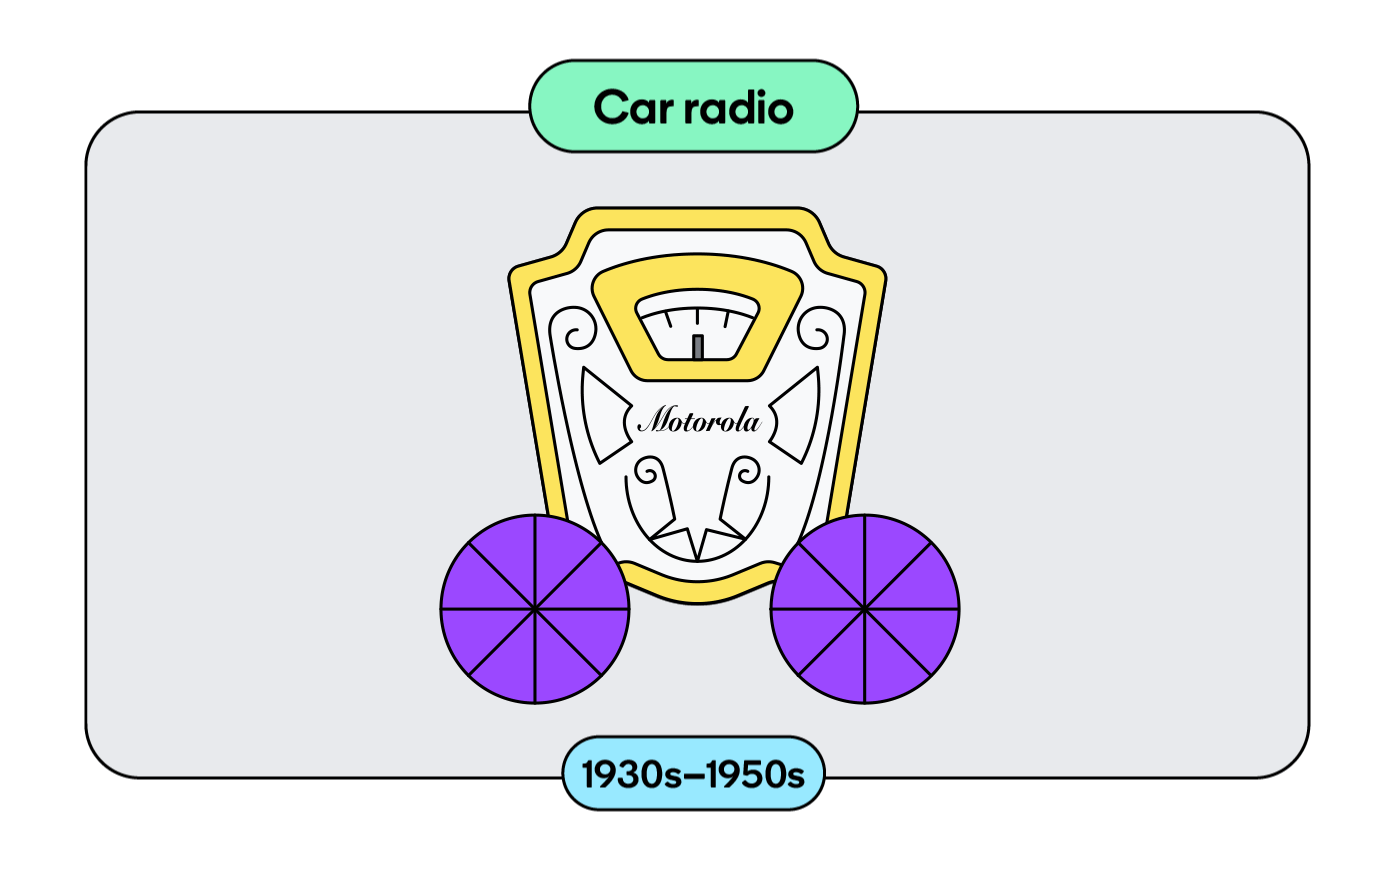 From the 1930s to 1950s, radio ruled the road.